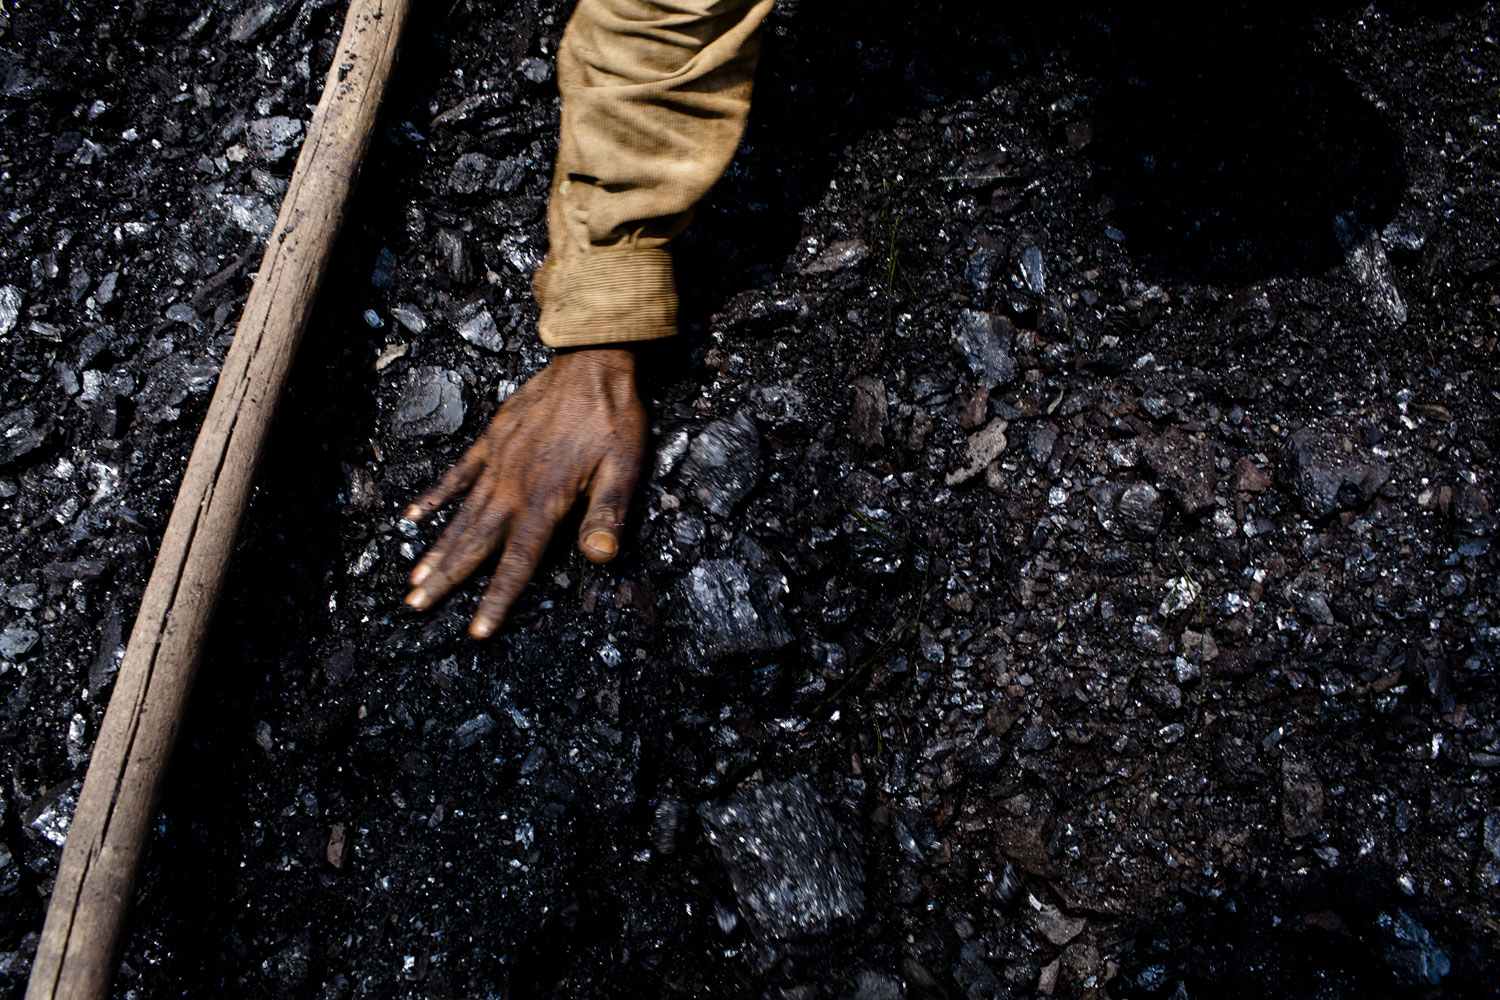 A worker, levels out the coal in a crate.